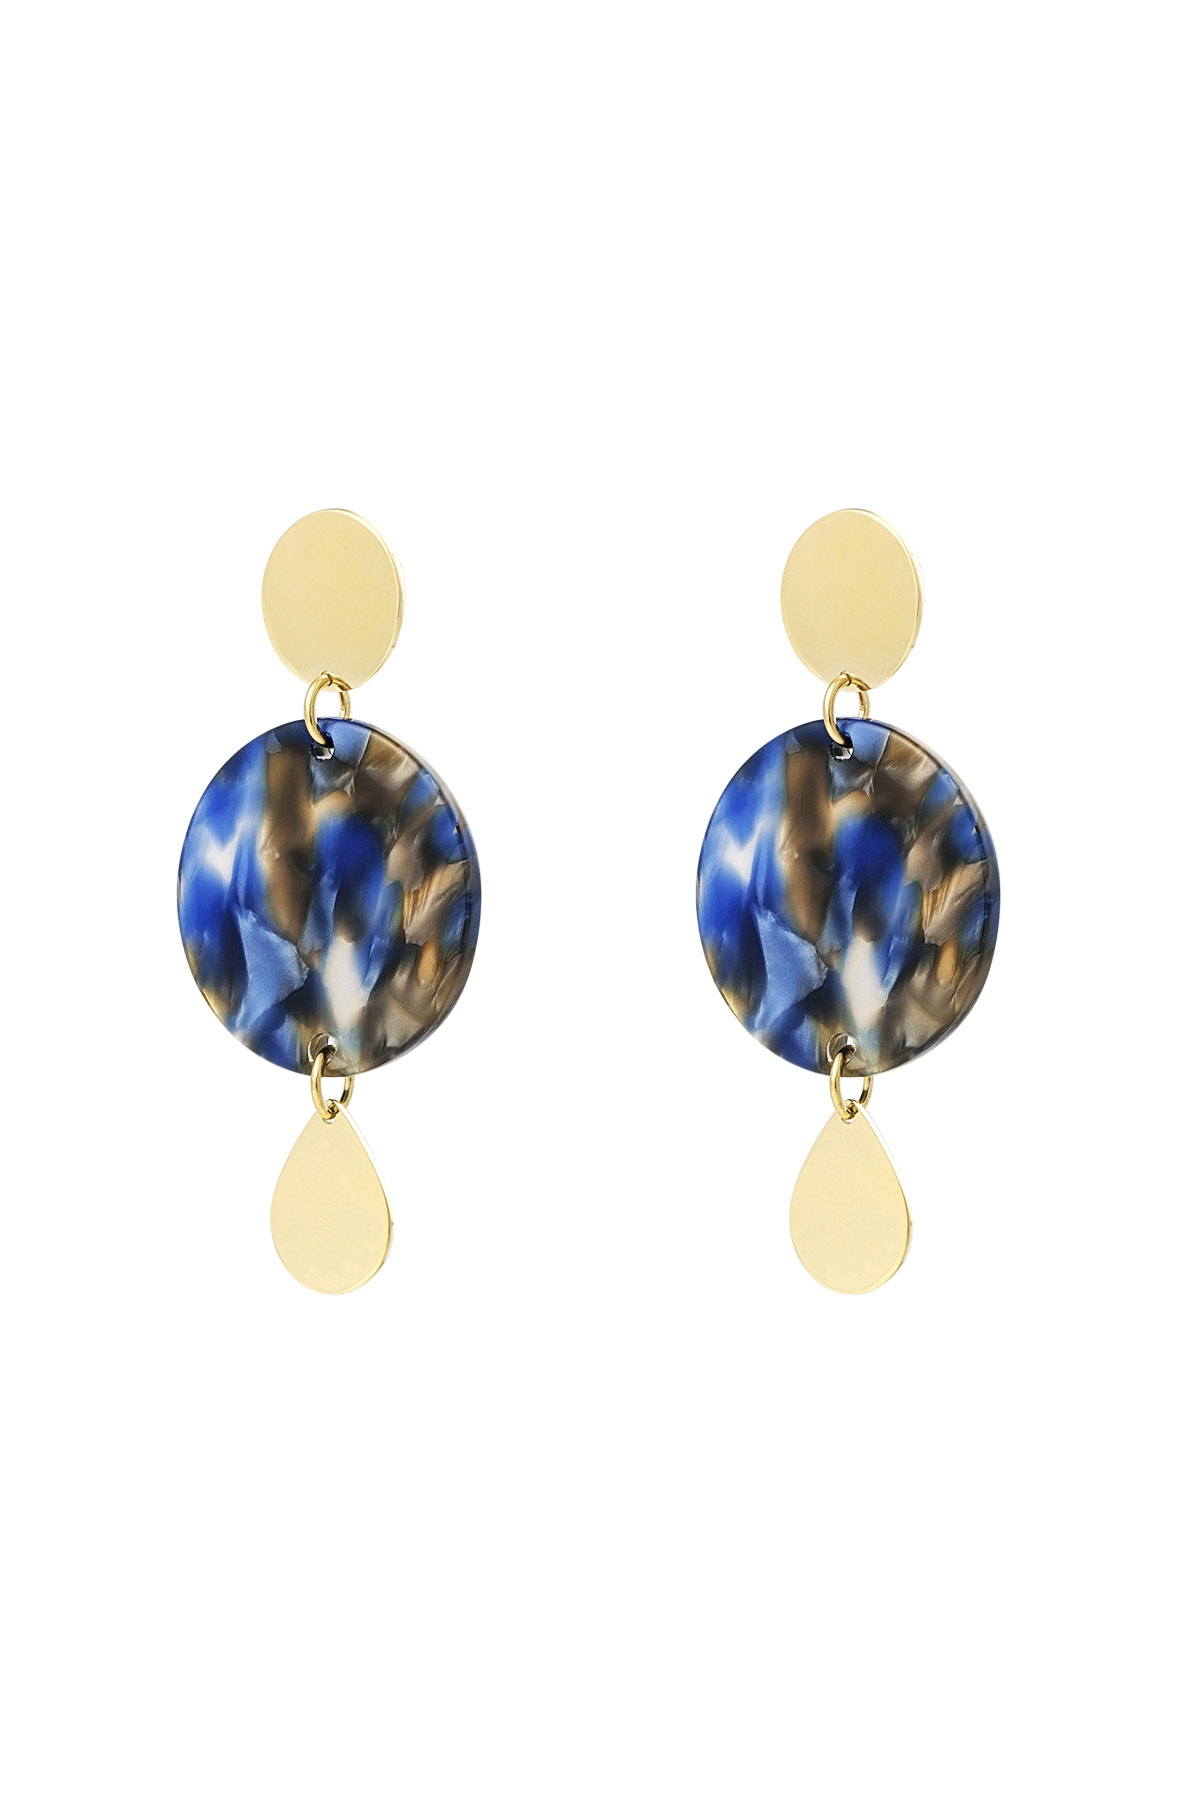 Earrings 3 times round - gold/blue